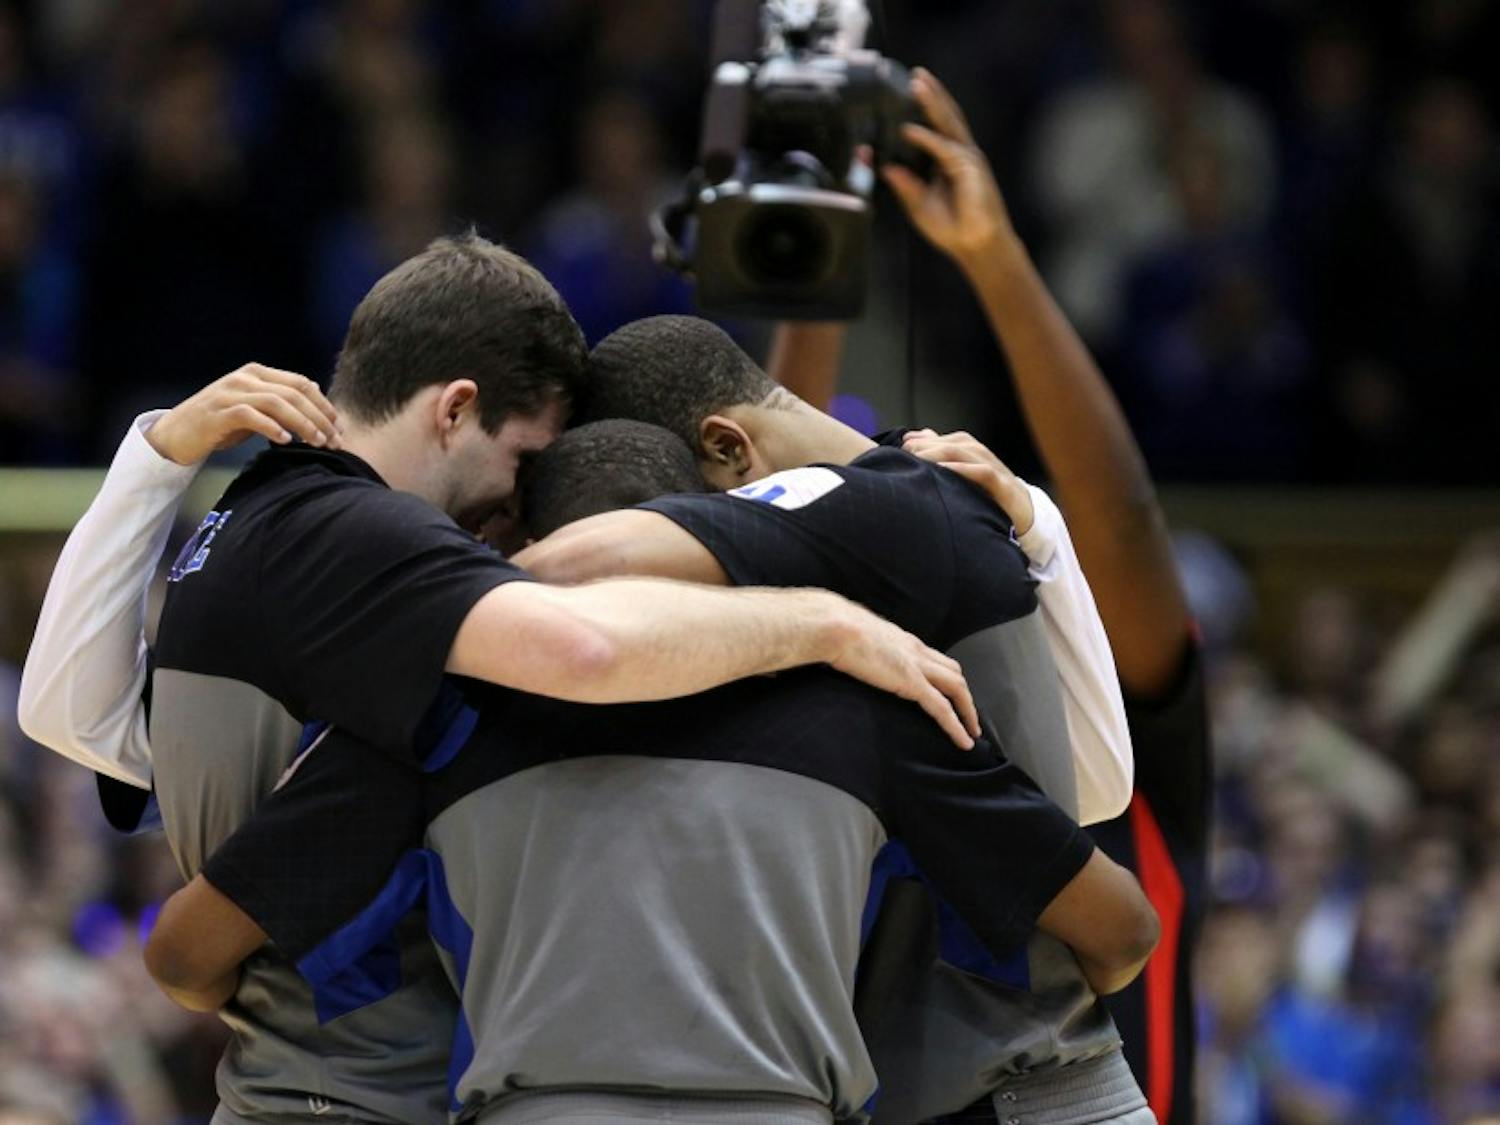 Although Duke's four seniors took center stage for Senior Night recognition, the Blue Devils are still a young basketball team according to their head coach.